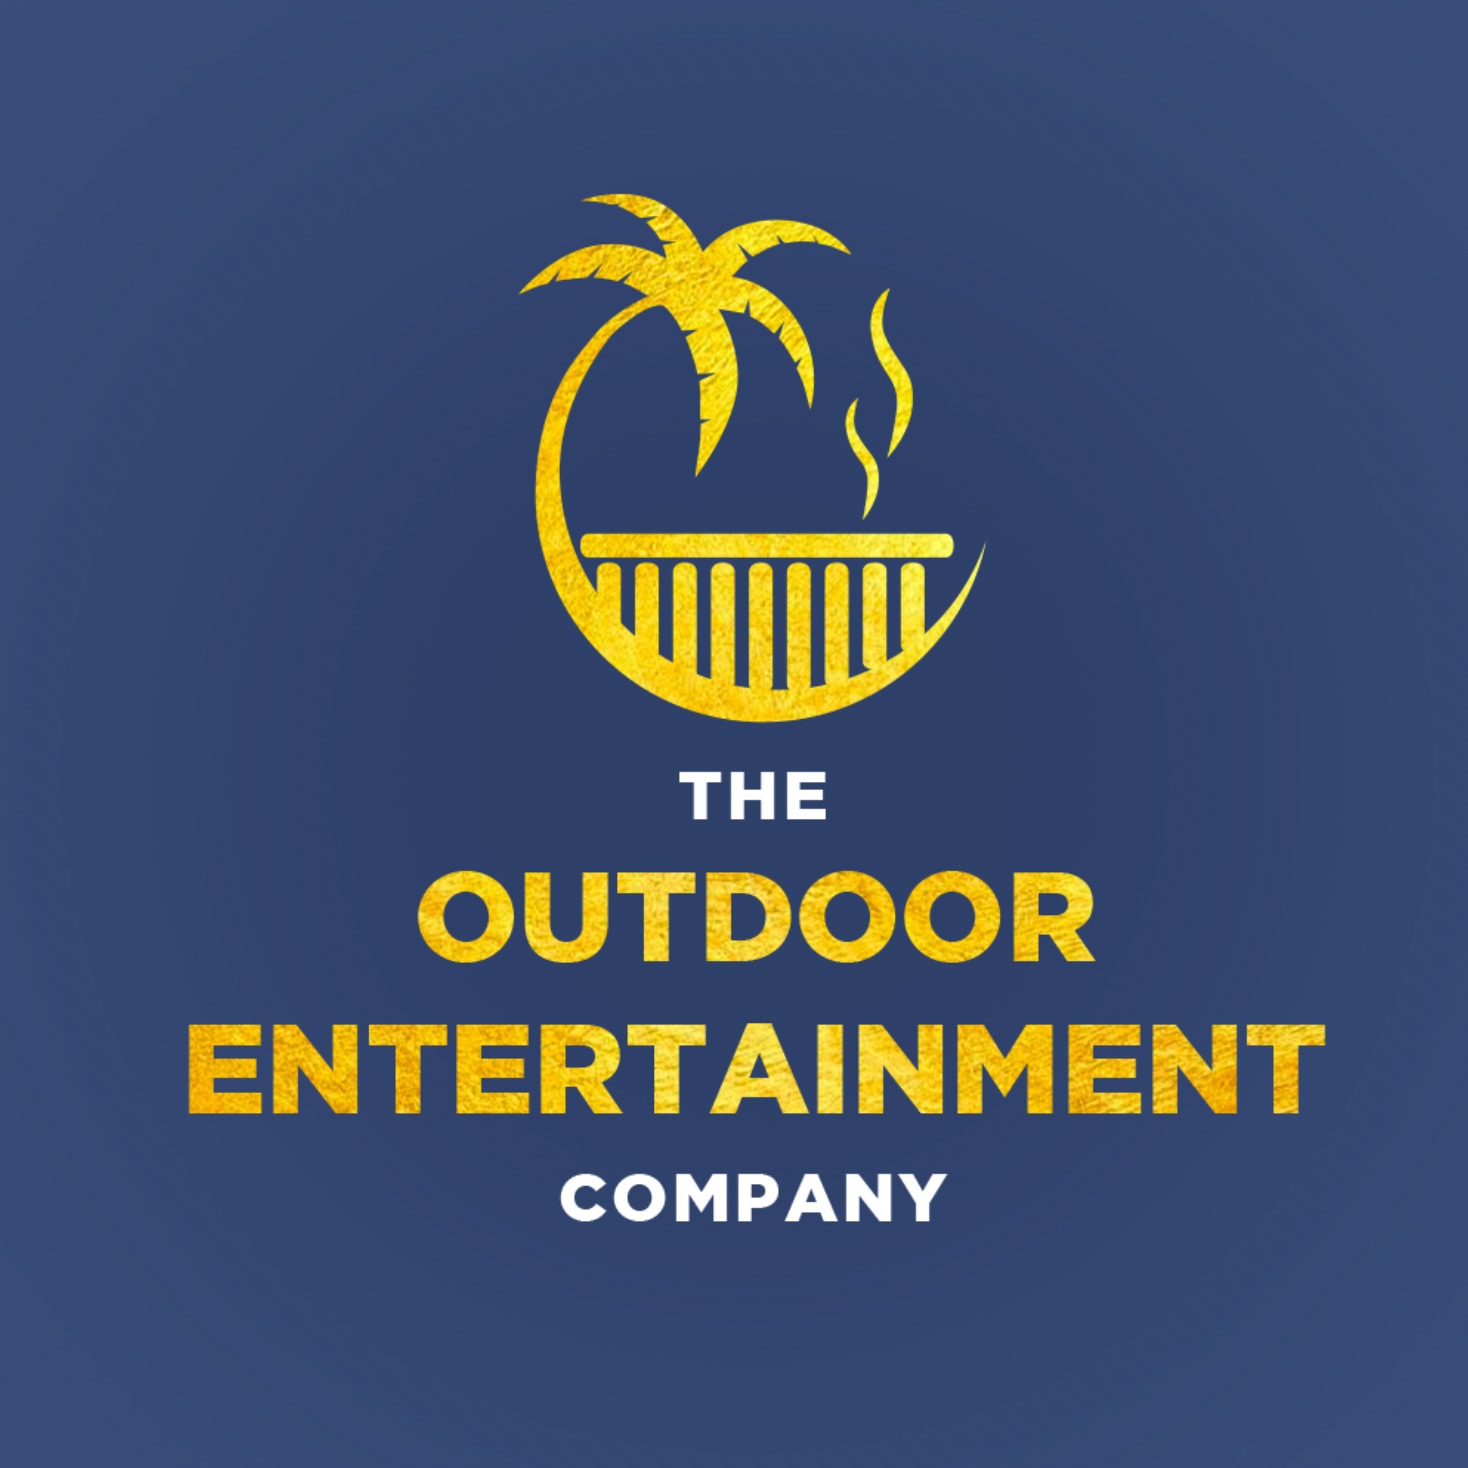 The Outdoor Entertainment Company